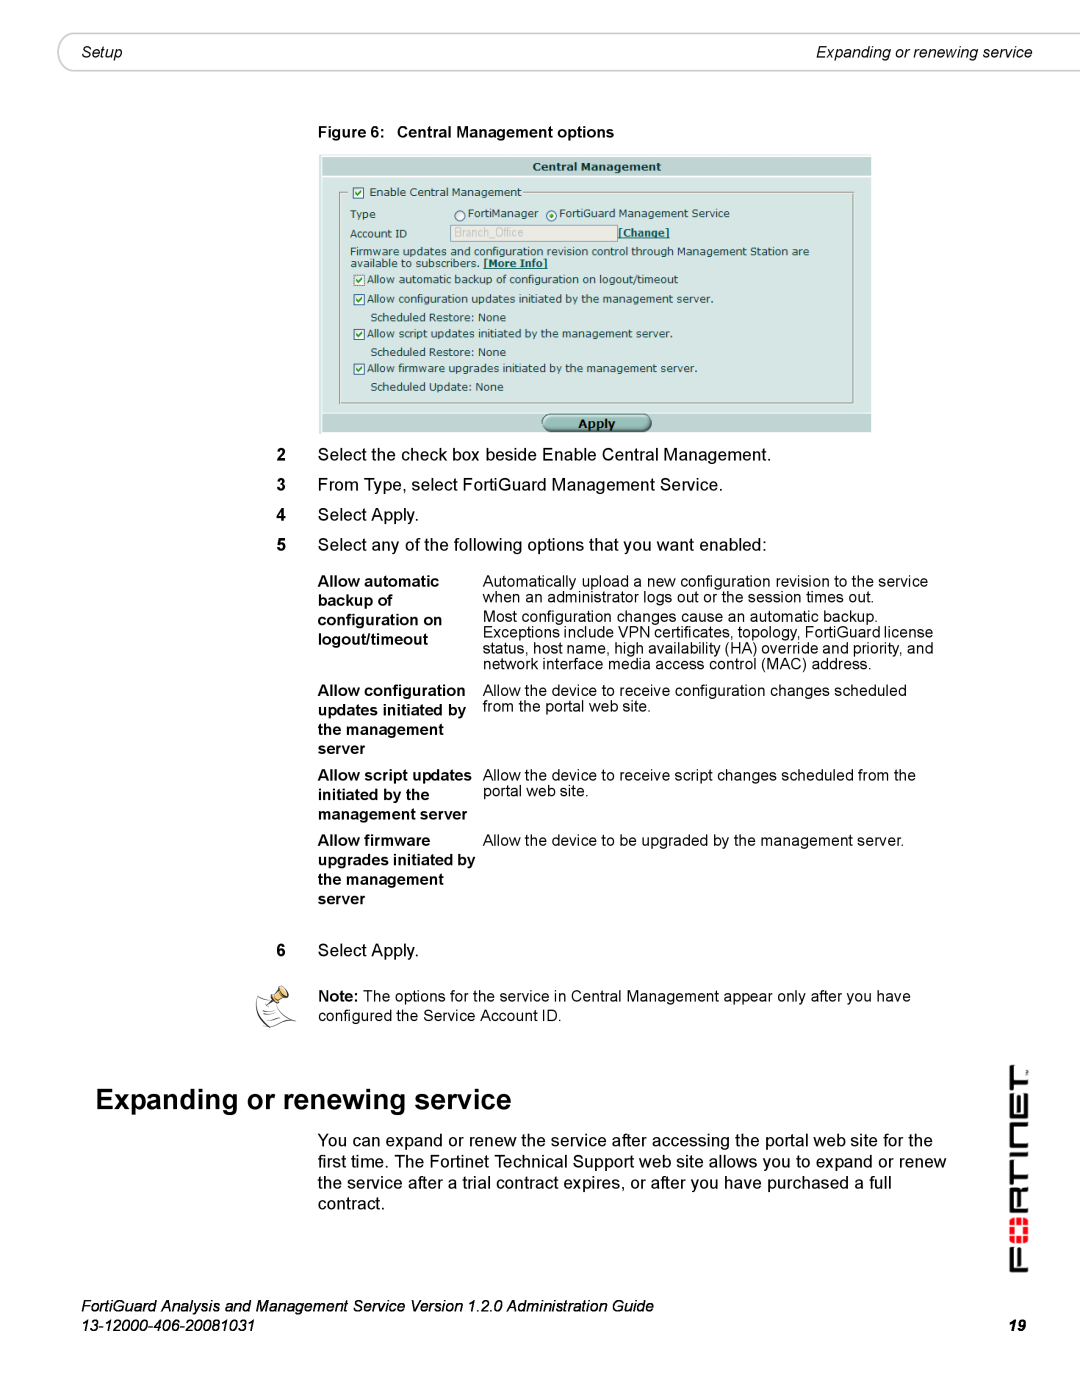 Fortinet 1.2.0 manual Expanding or renewing service, Setup, Central Management options, 13-12000-406-20081031 